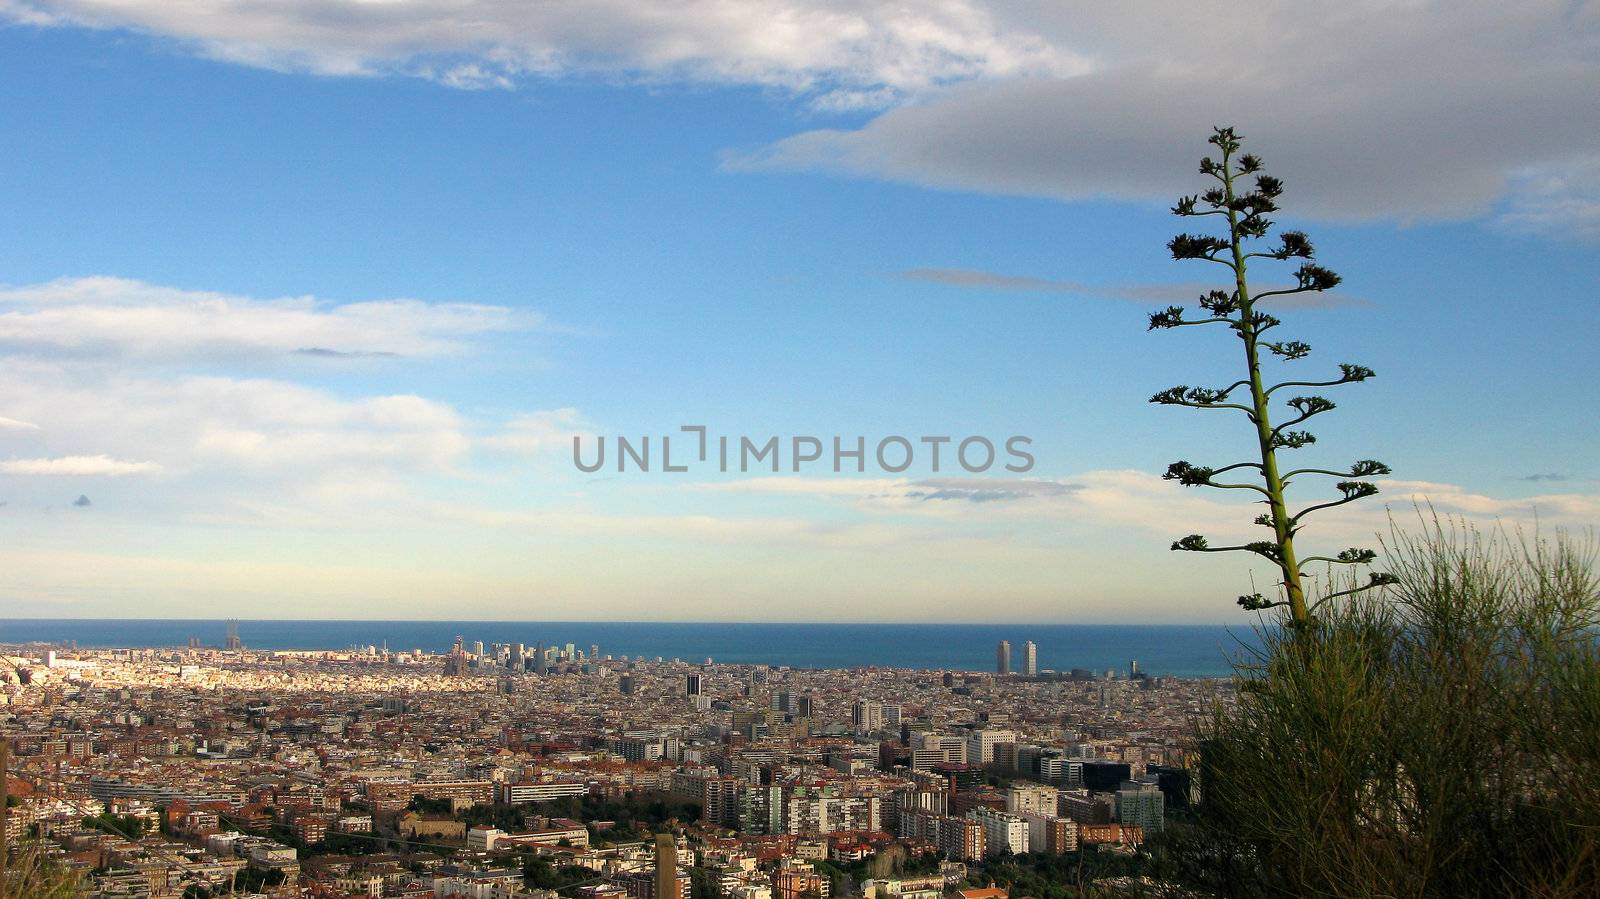 Barcelona, view from the hills by Arrxxx